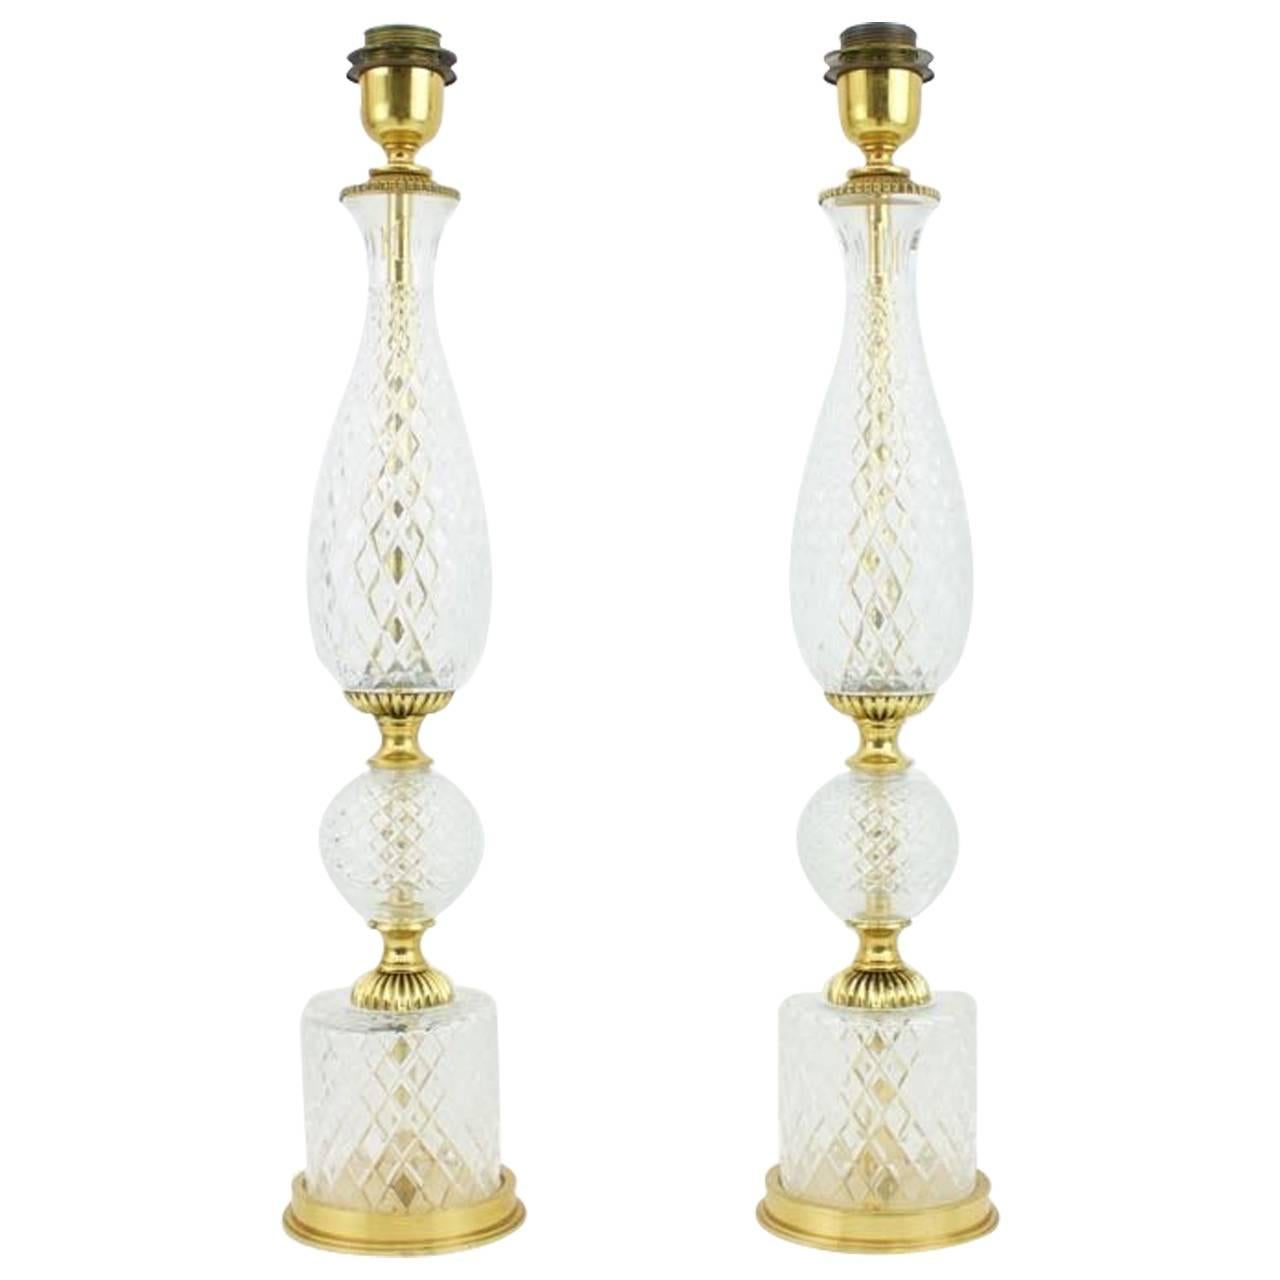 Pair of Elegant Textured Glass and Brass Table Lamps, 1960s For Sale